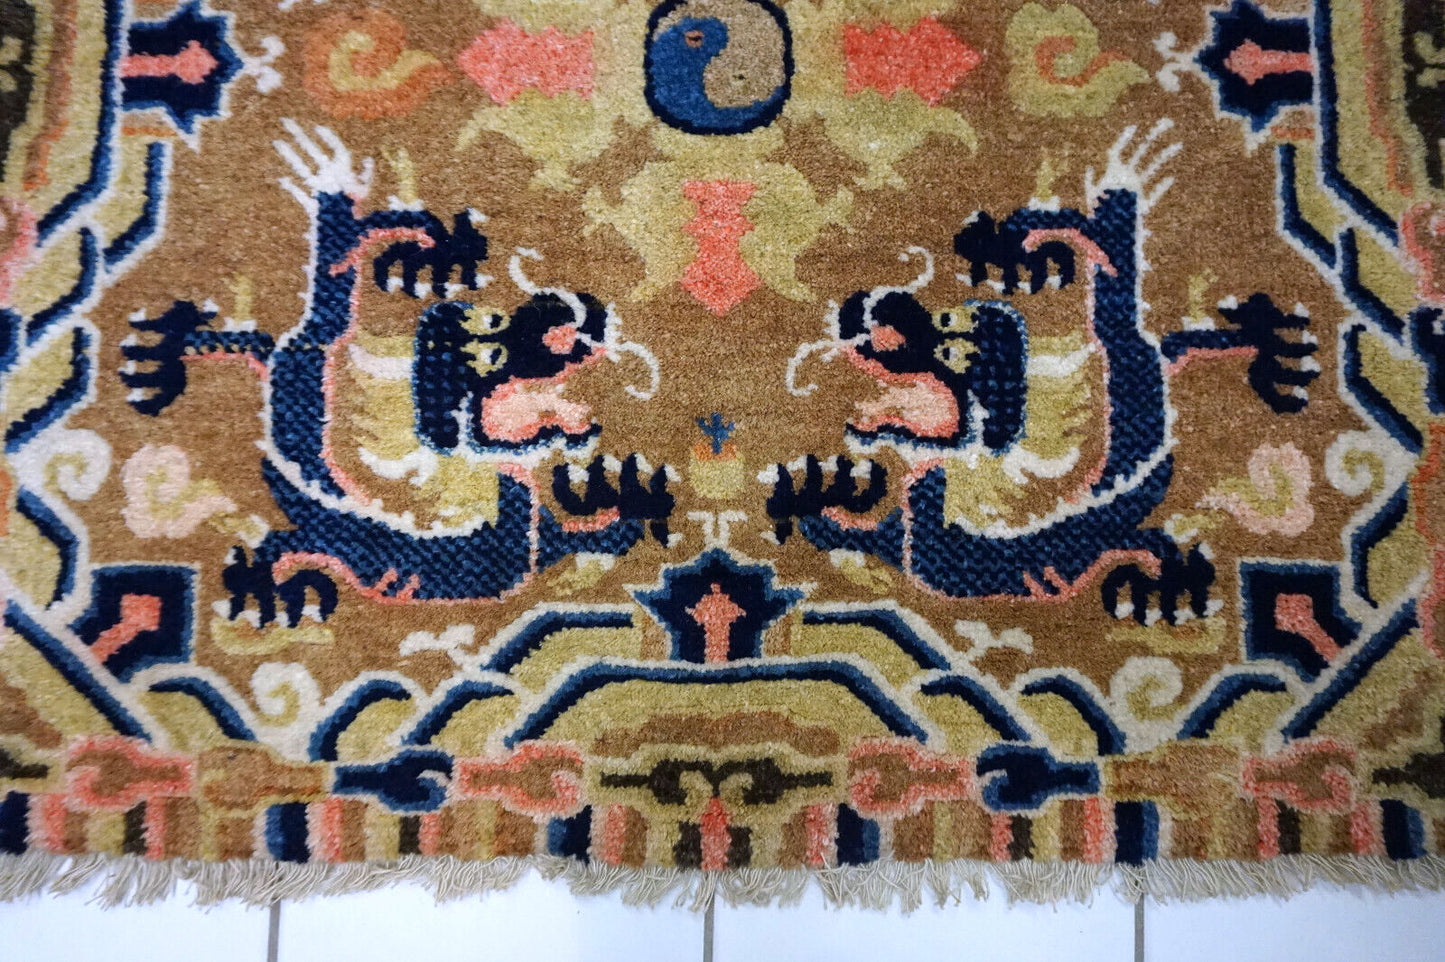 Handcrafted wool rug from China with intricate design